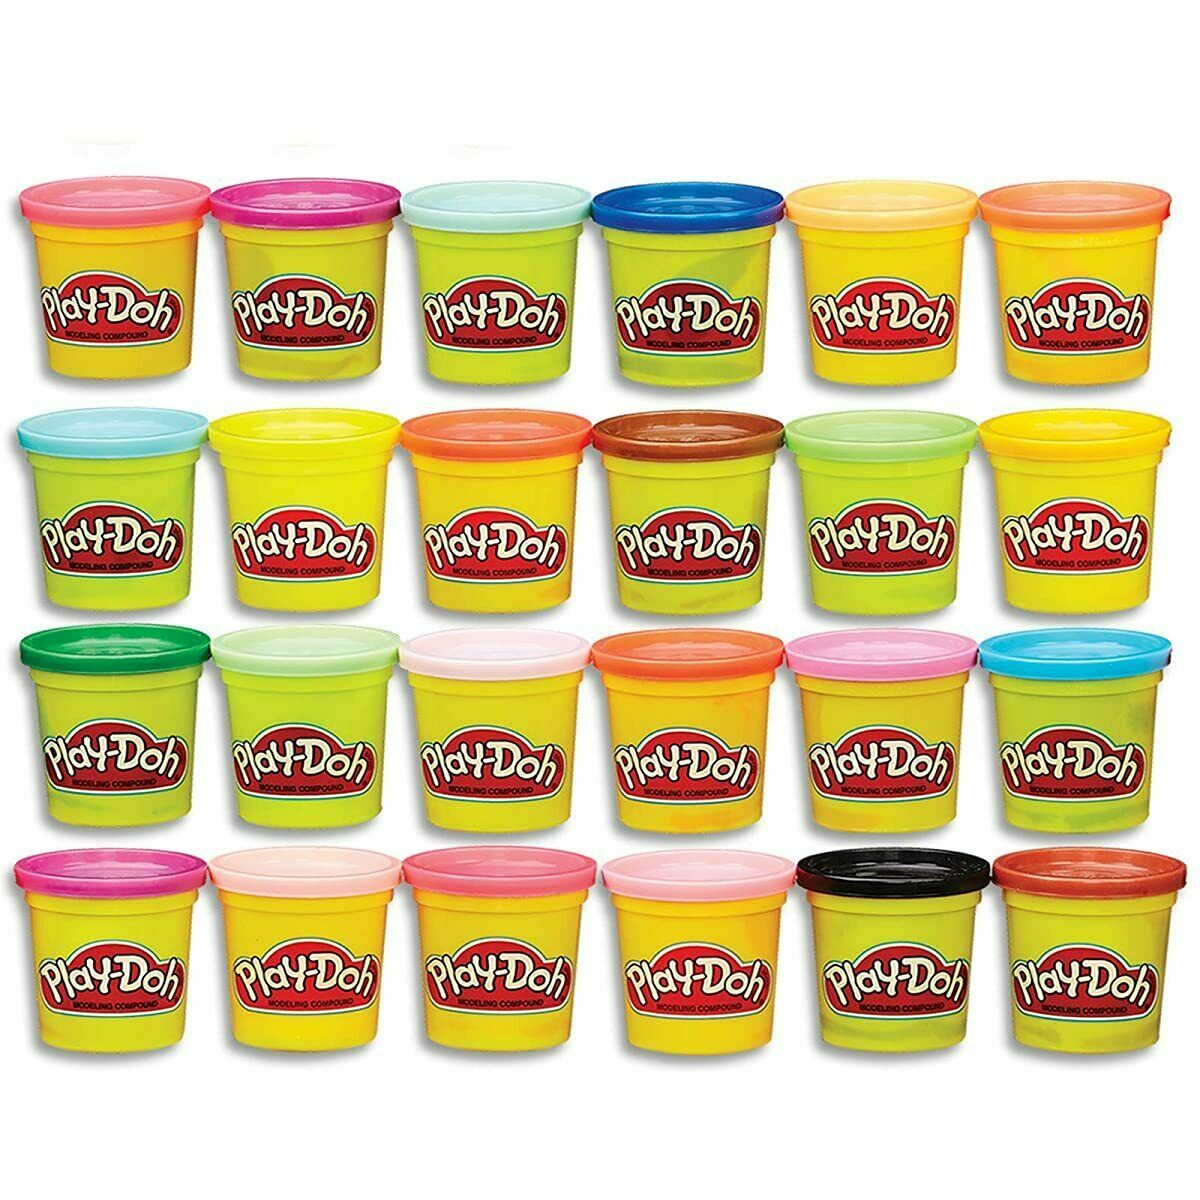 Play-Doh Modeling Compound 24-Pack Case of Colors, Non-Toxic, Multi-Color, 3-Oun